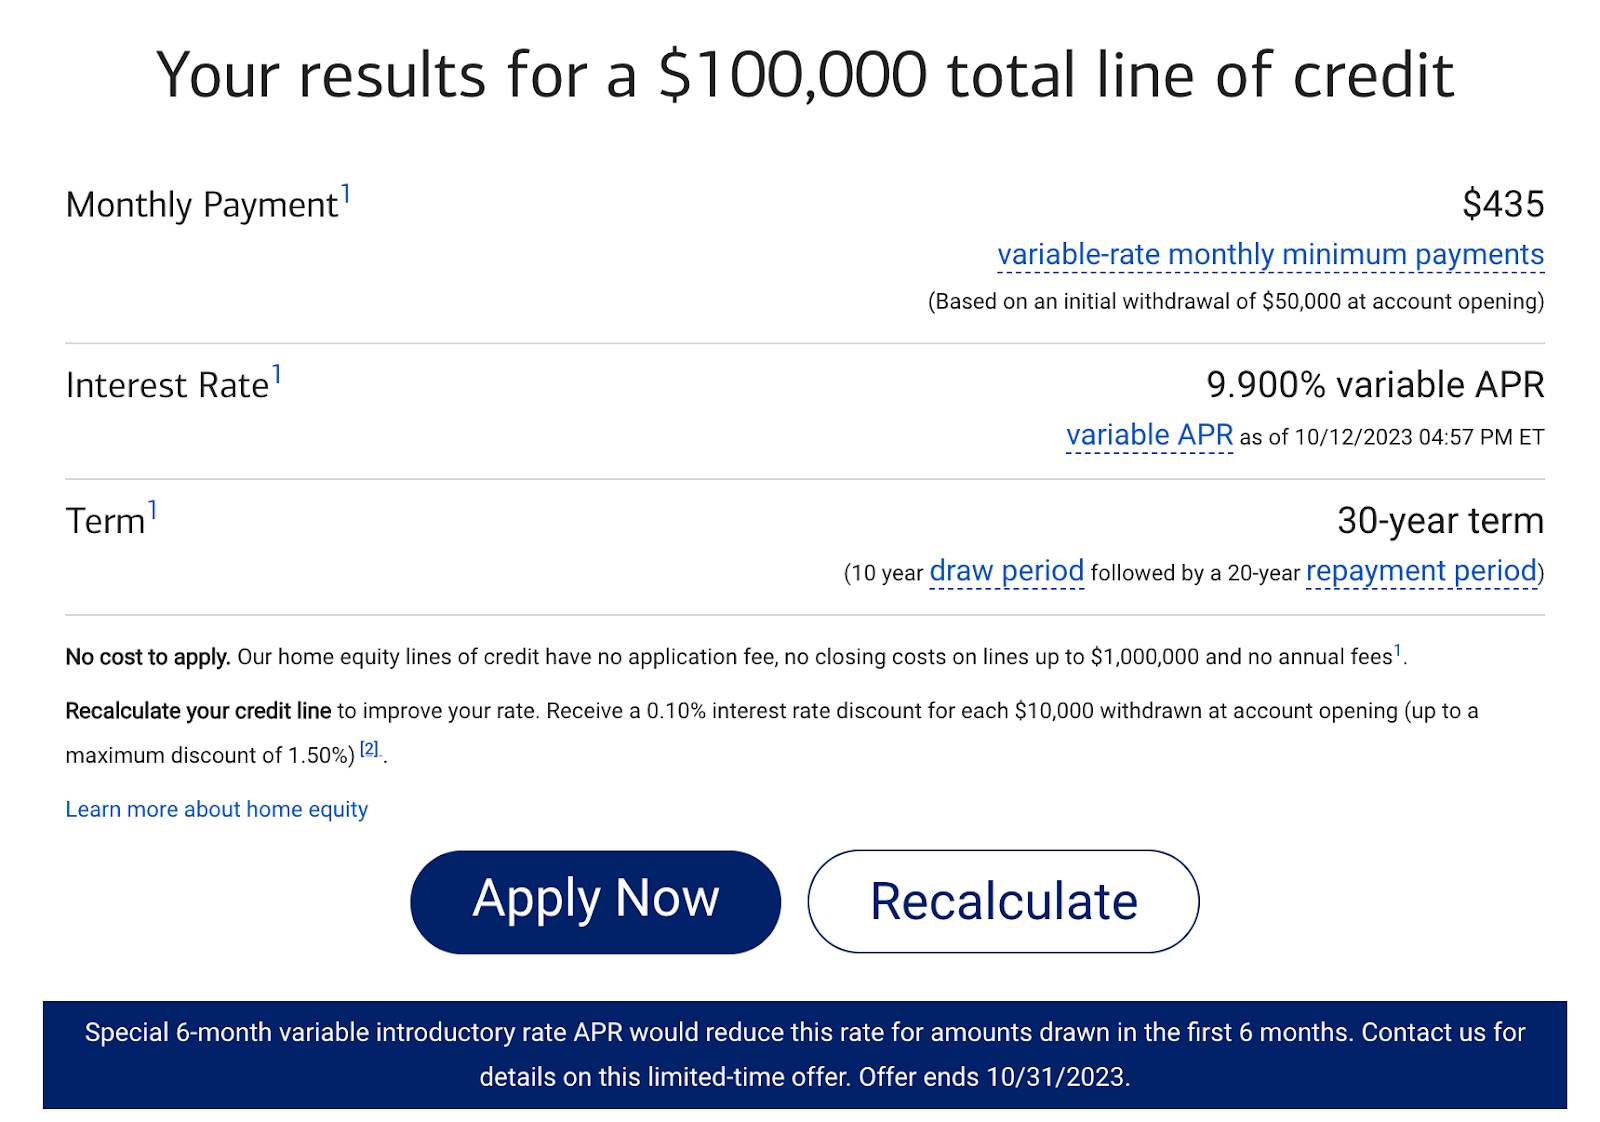 Image from Bank of America's home equity calculator showing monthly payments, interest rate, and term for a $100,000 line of credit